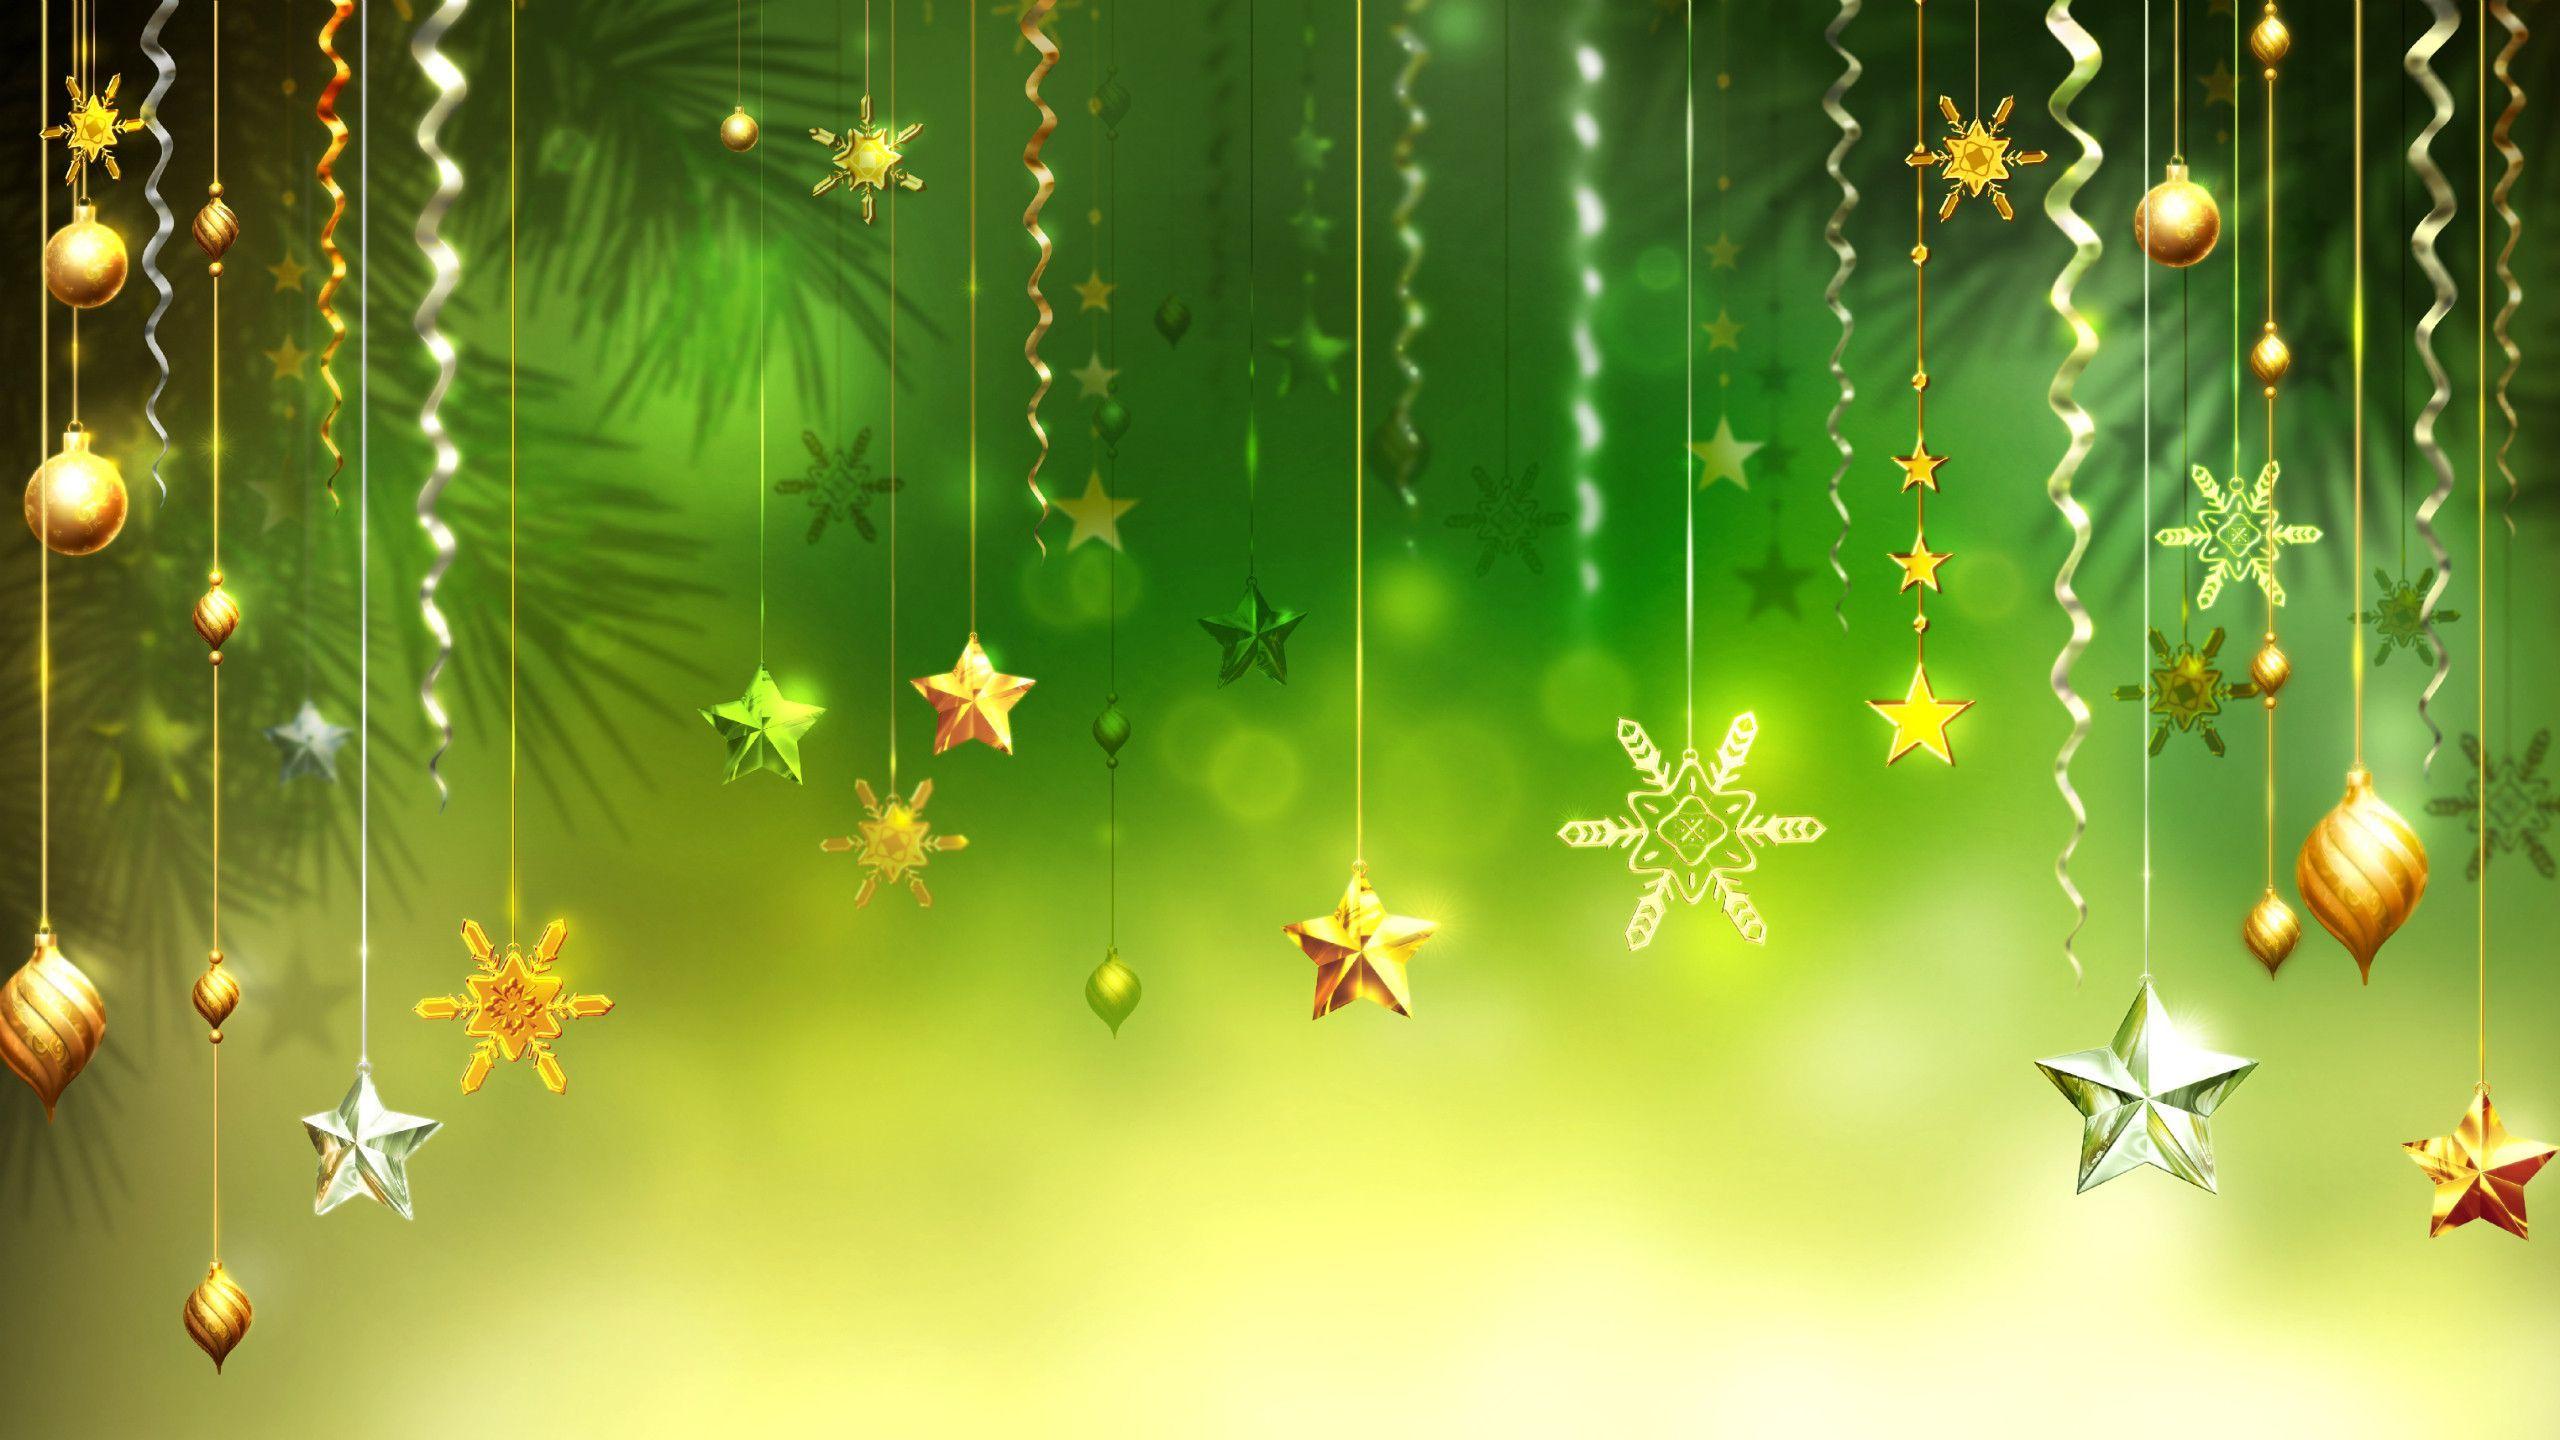 Christmas Background Wallpaper (Green, Red, Blue) Nice